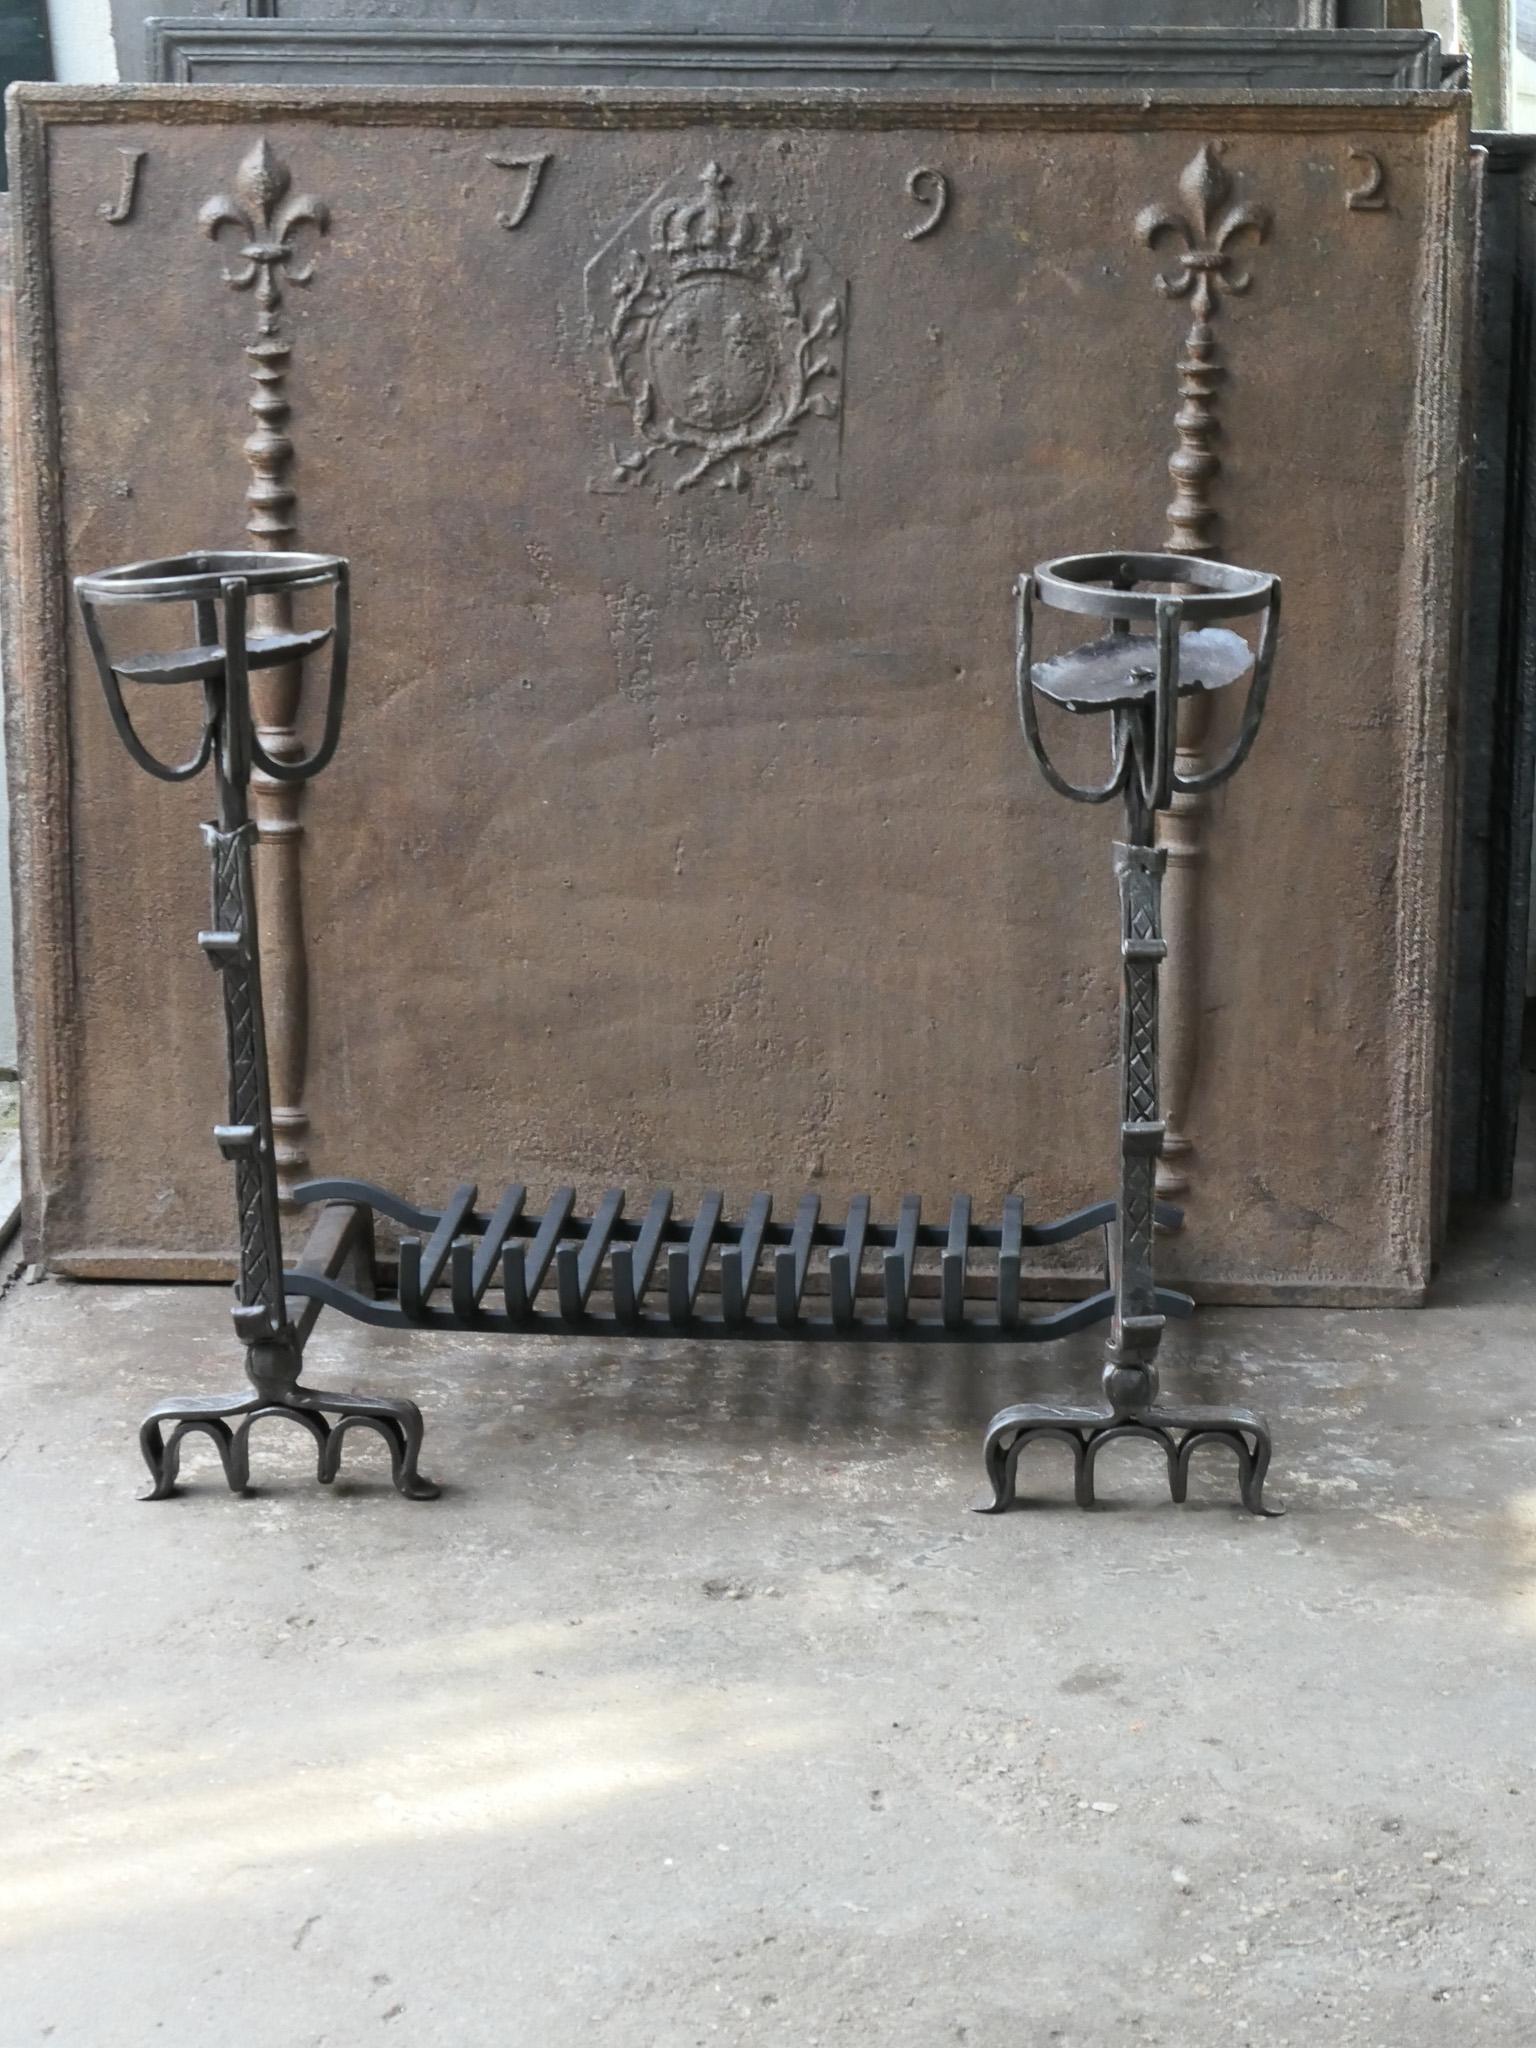 17th century French Gothic fire grate with period andirons and a recently forged grate. Made of wrought iron. The condition is good. 







